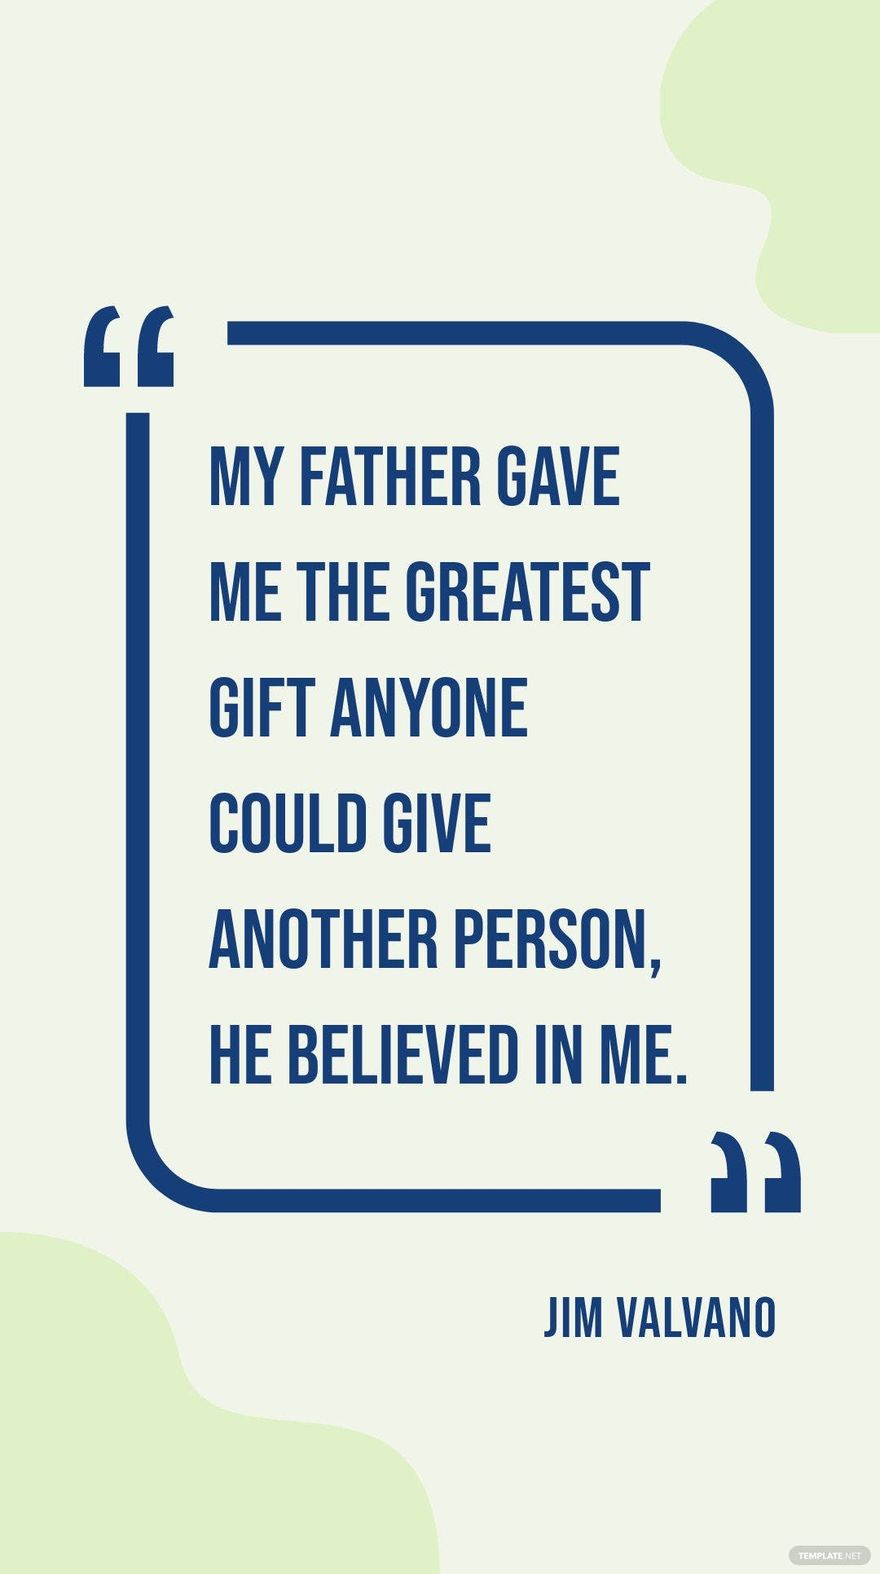 Jim Valvano - My father gave me the greatest gift anyone could give another person, he believed in me. in JPG